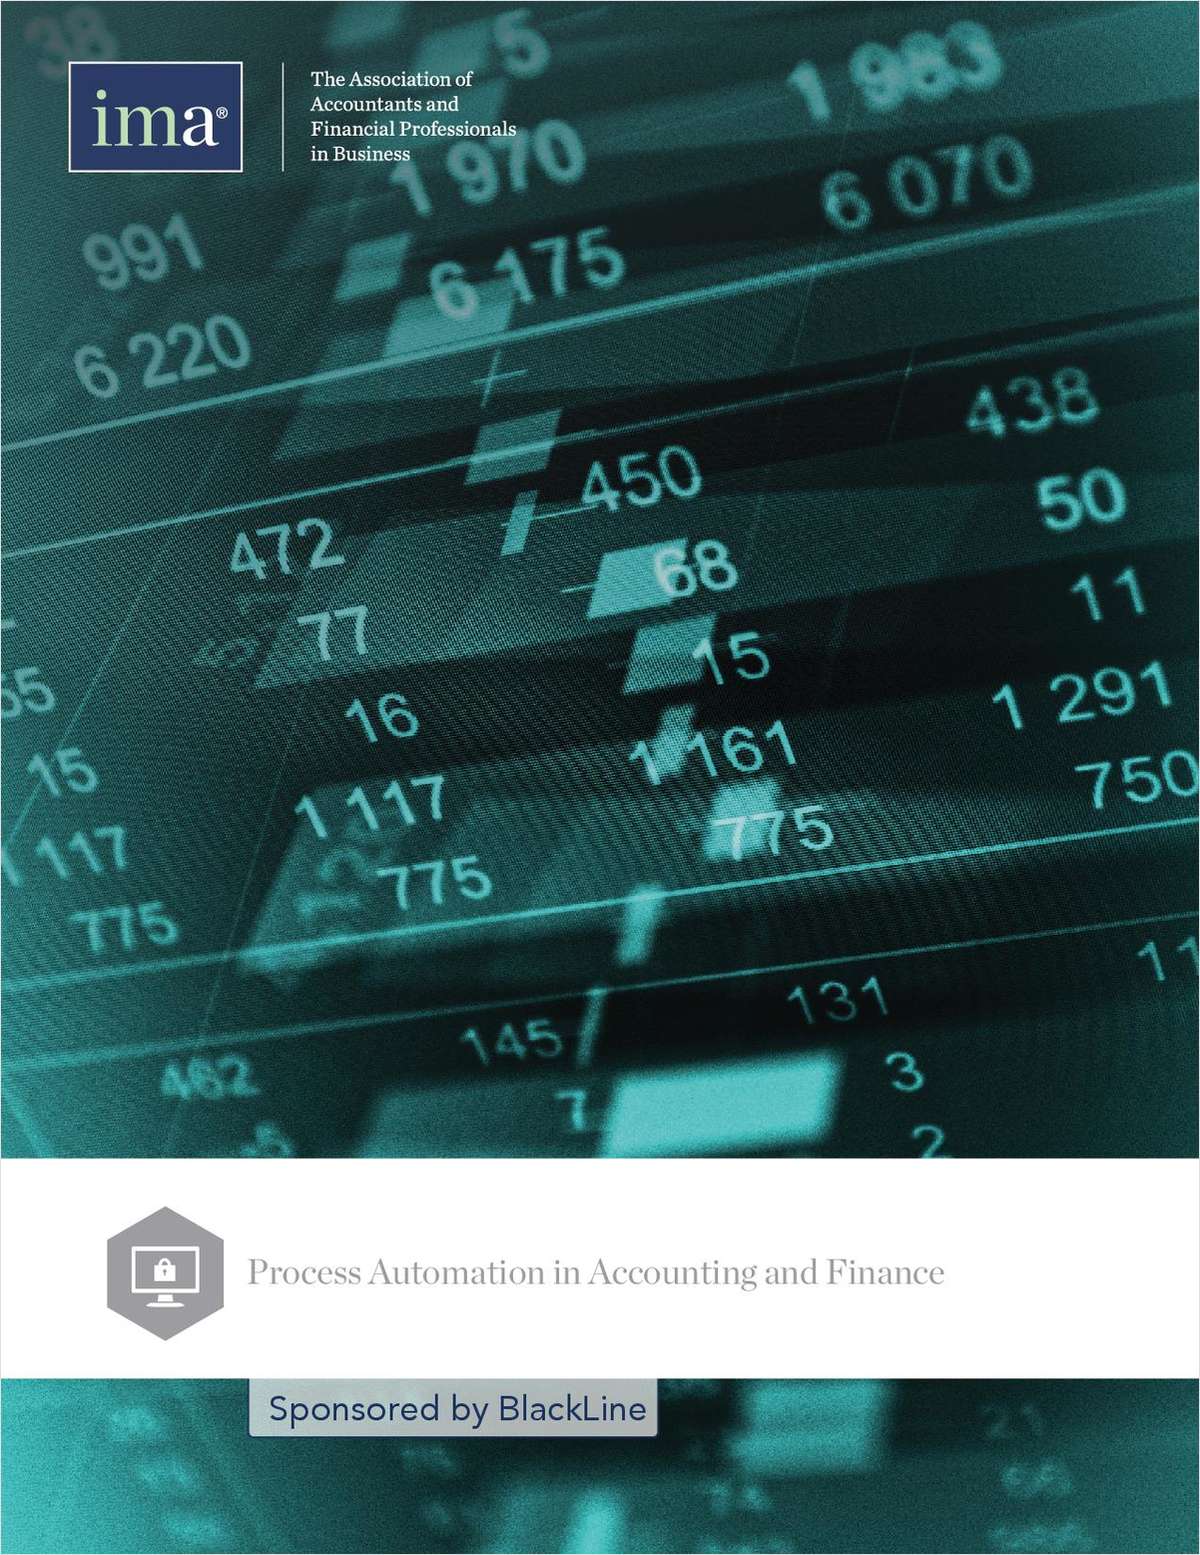 Process Automation in Accounting & Finance